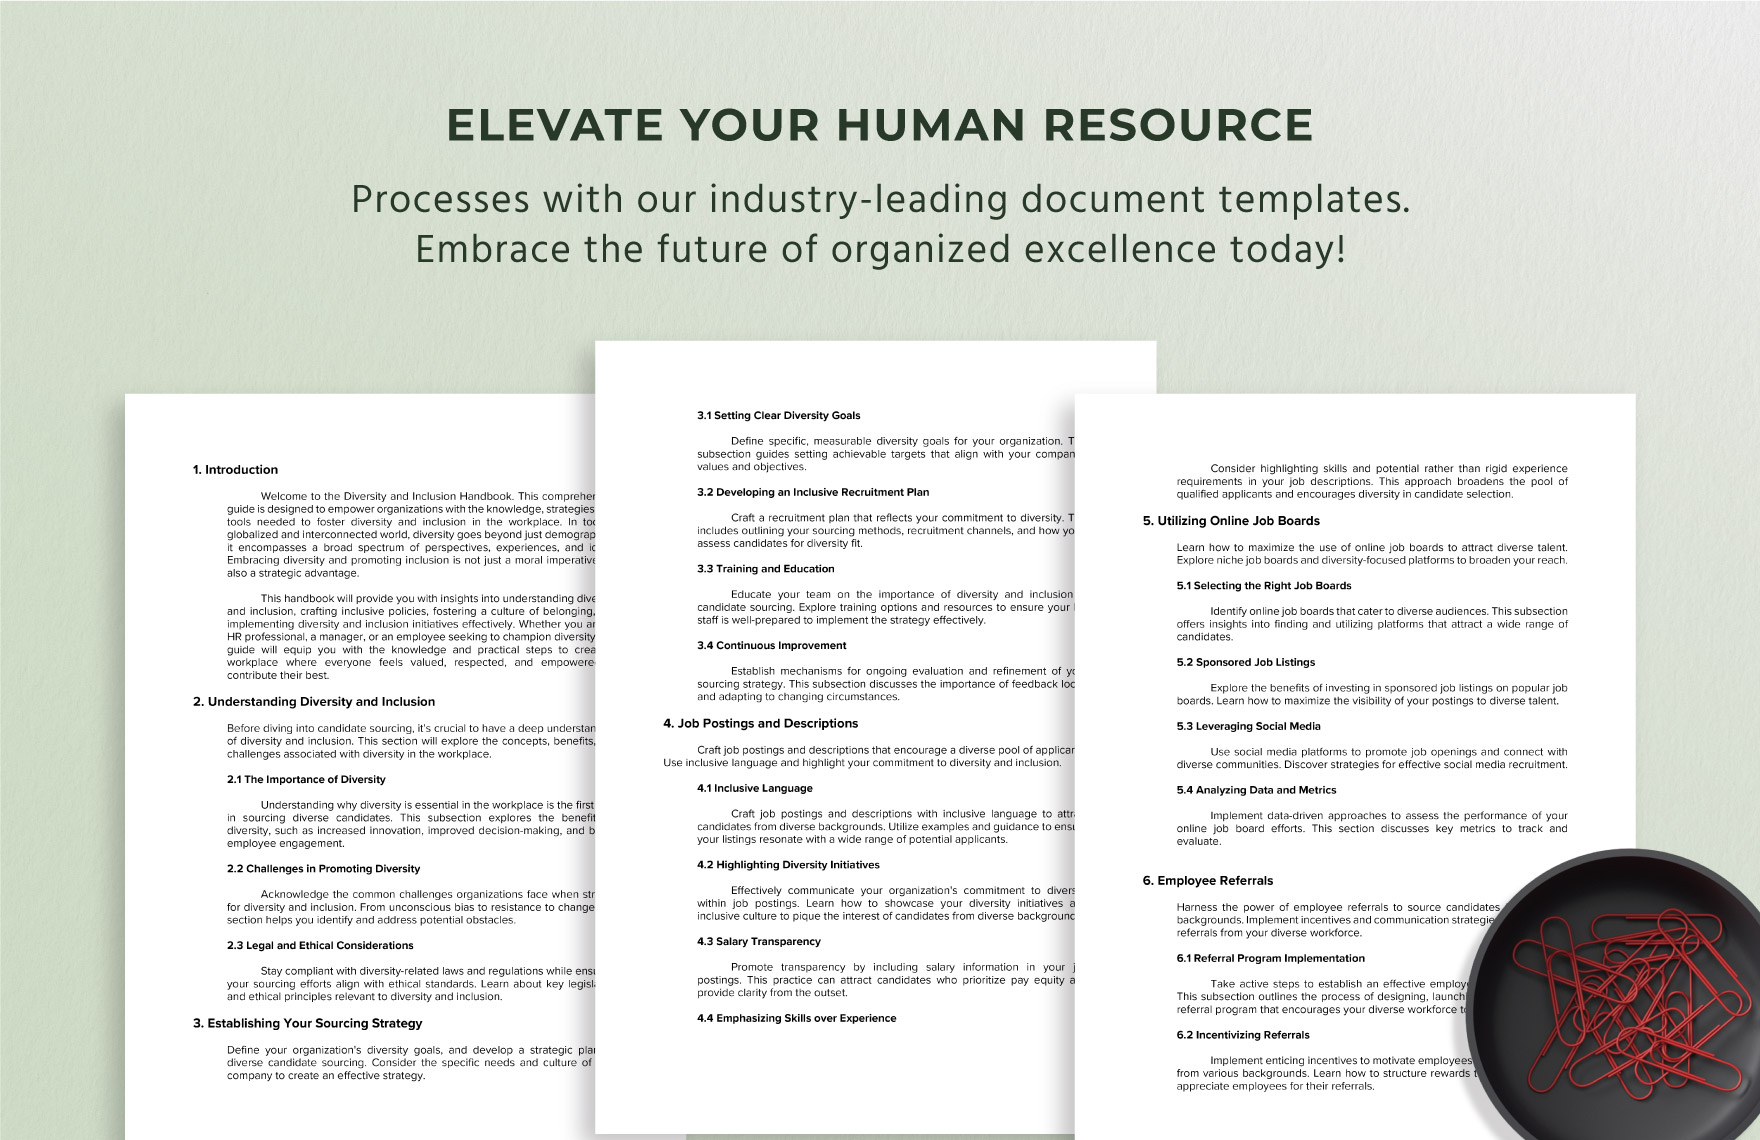 Diverse Candidate Sourcing Guide HR Template